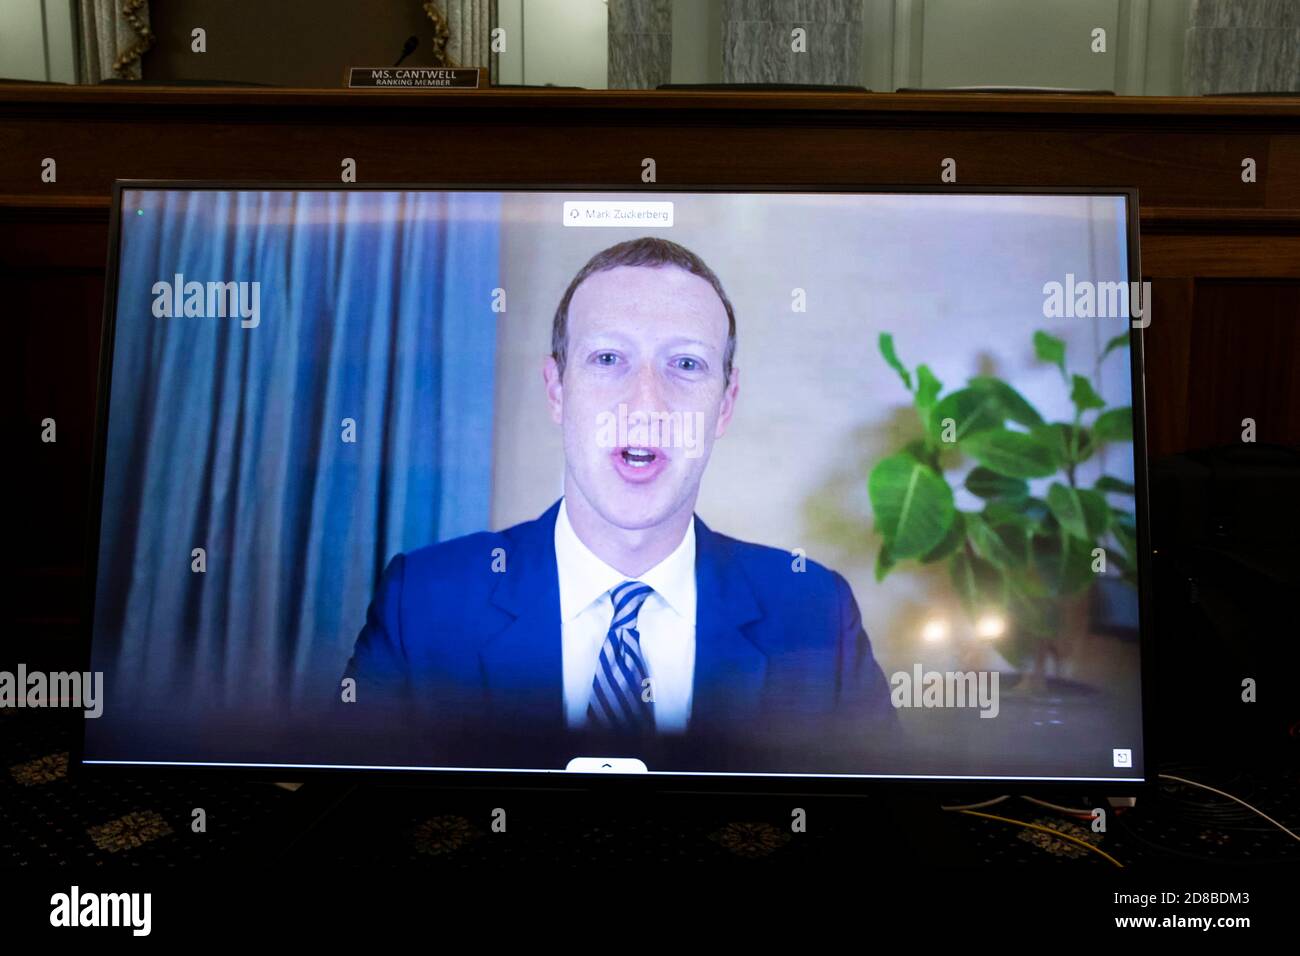 (201028) -- WASHINGTON, Oct. 28, 2020 (Xinhua) -- Facebook CEO Mark Zuckerberg is seen on a screen during the hearing of U.S. Senate Committee on Commerce, Science, and Transportation titled 'Does Section 230's Sweeping Immunity Enable Big Tech Bad Behavior?' on Capitol Hill in Washington, DC, the United States, on Oct. 28, 2020. (Michael Reynolds/Pool via Xinhua) Stock Photo